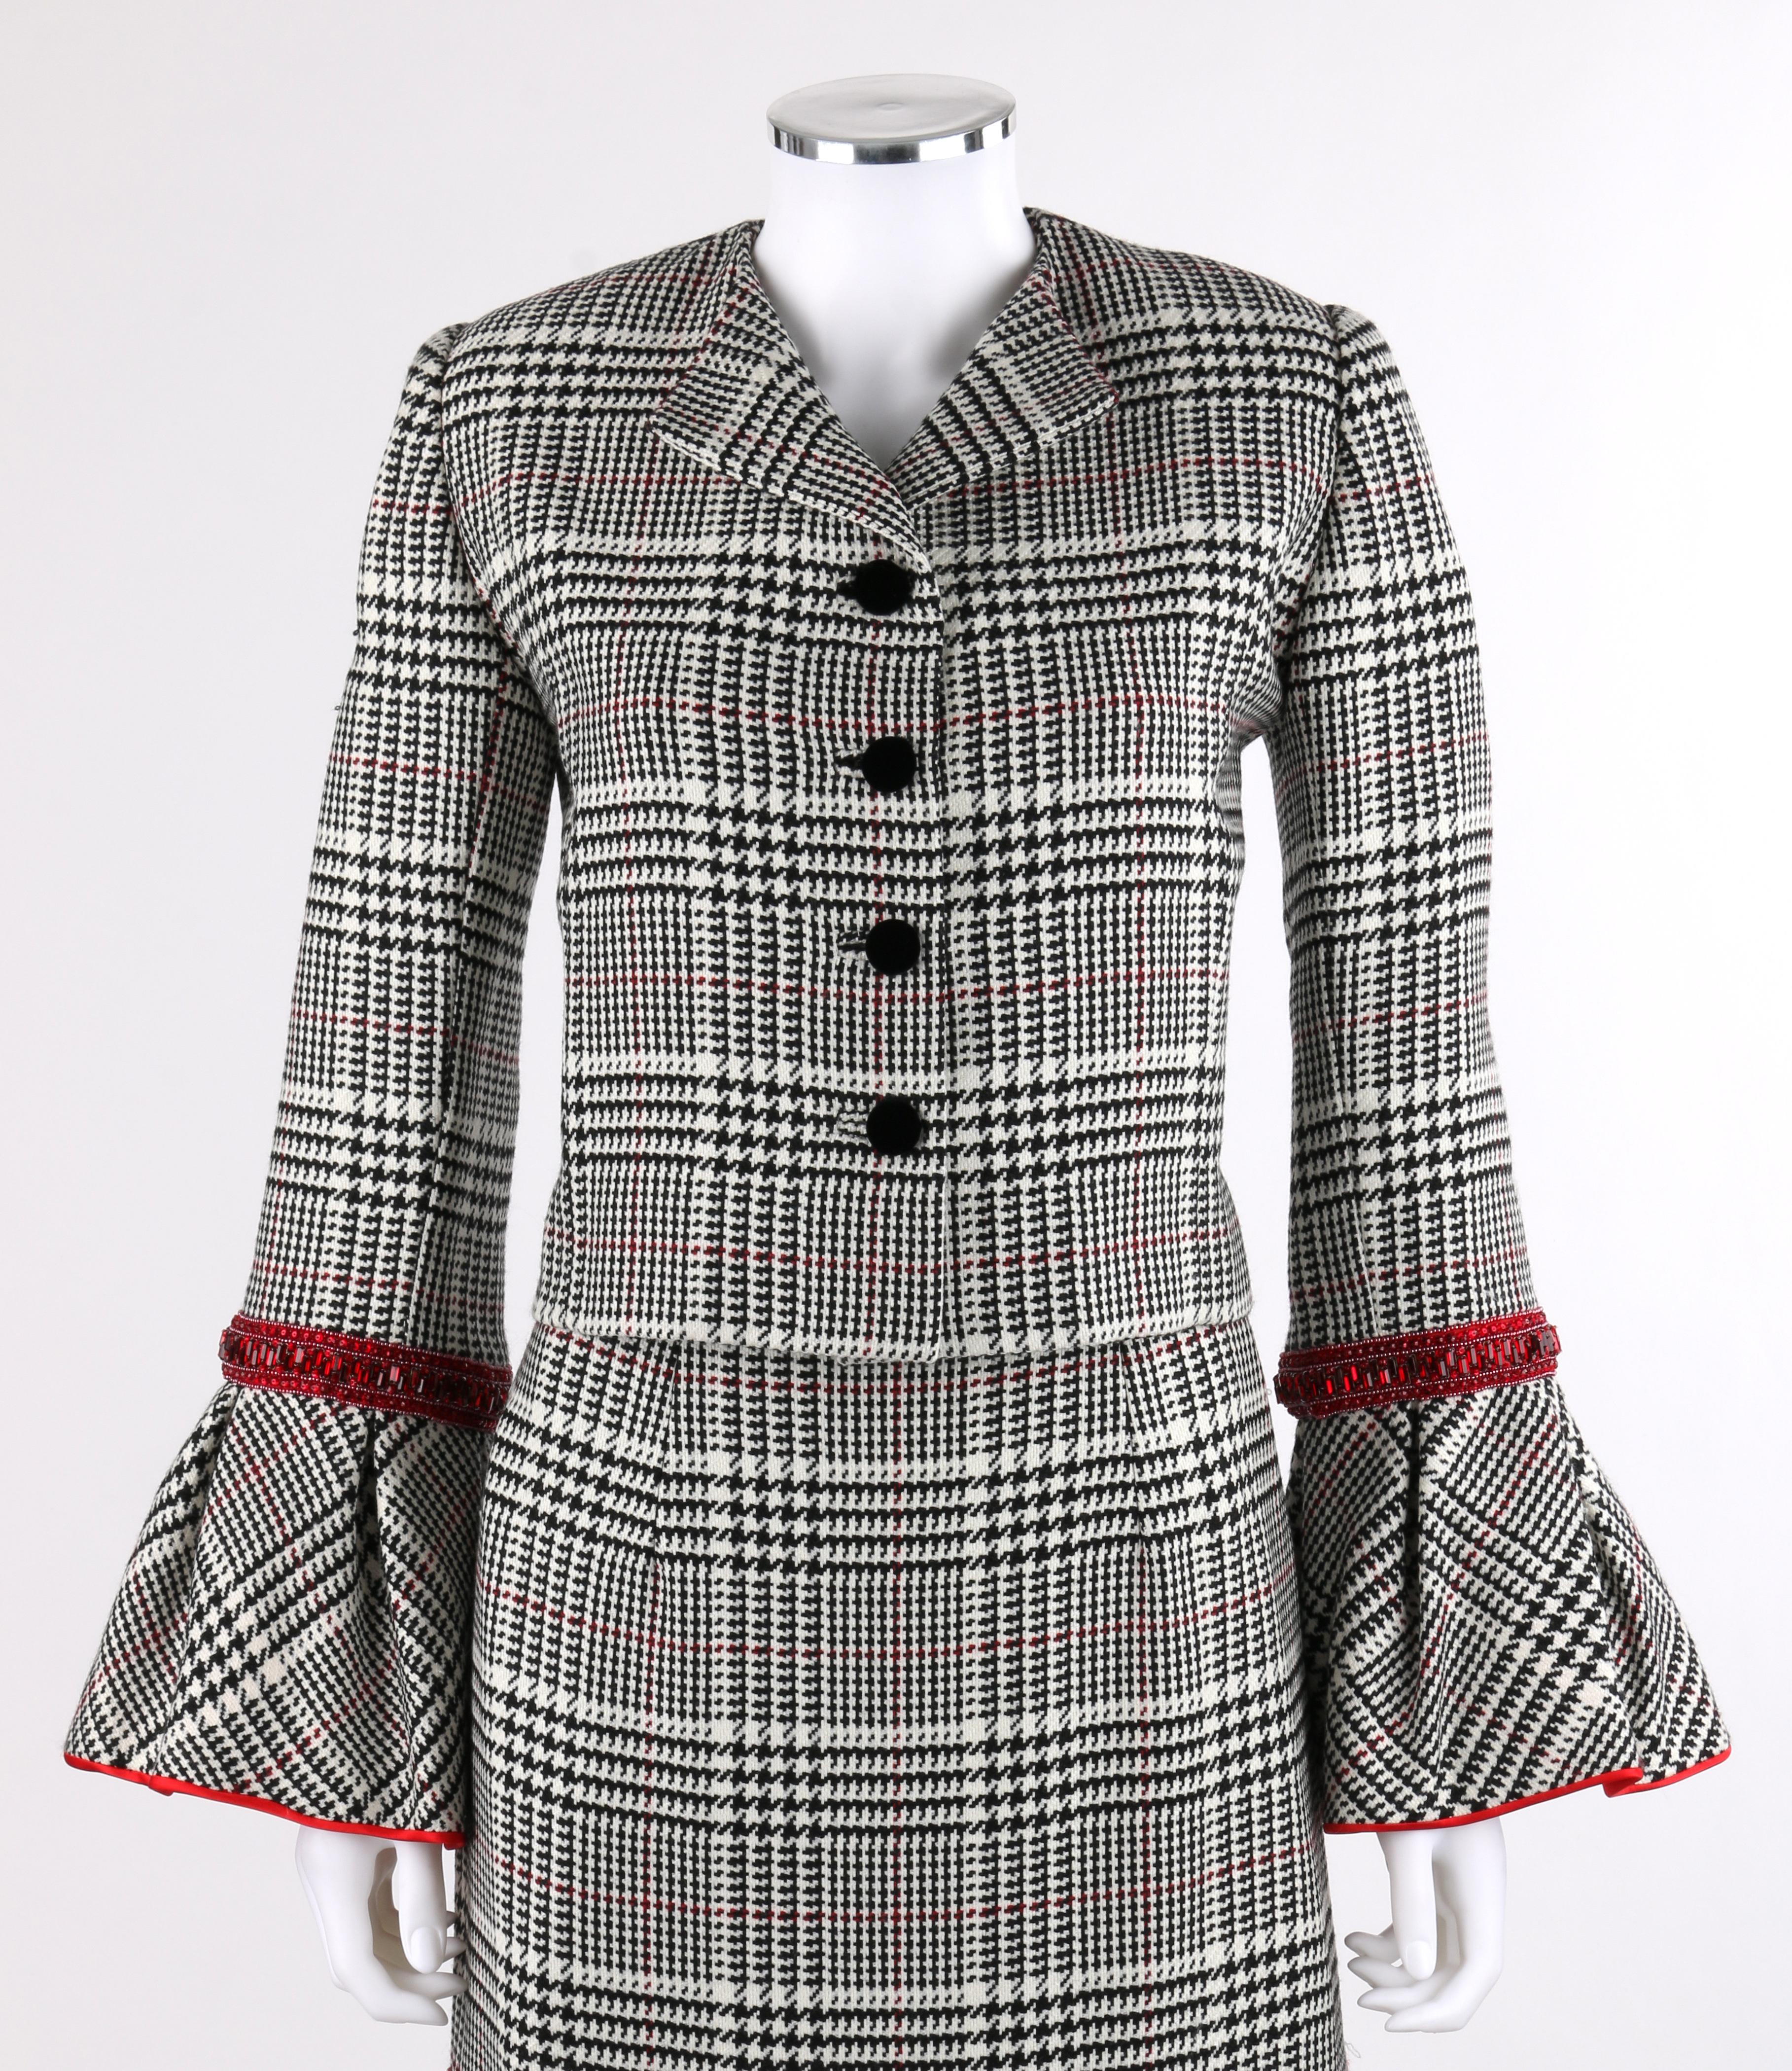 PEGGY JENNINGS Couture Black White Houndstooth Ruby Red Trim Trumpet Skirt Jacket Dress Suit
 
Brand / Manufacturer: Peggy Jennings / Couture
Designer: Peggy Jennings
Style: Two piece skirt suit
Color(s): Shades of Black, white, and red
Lined: Yes